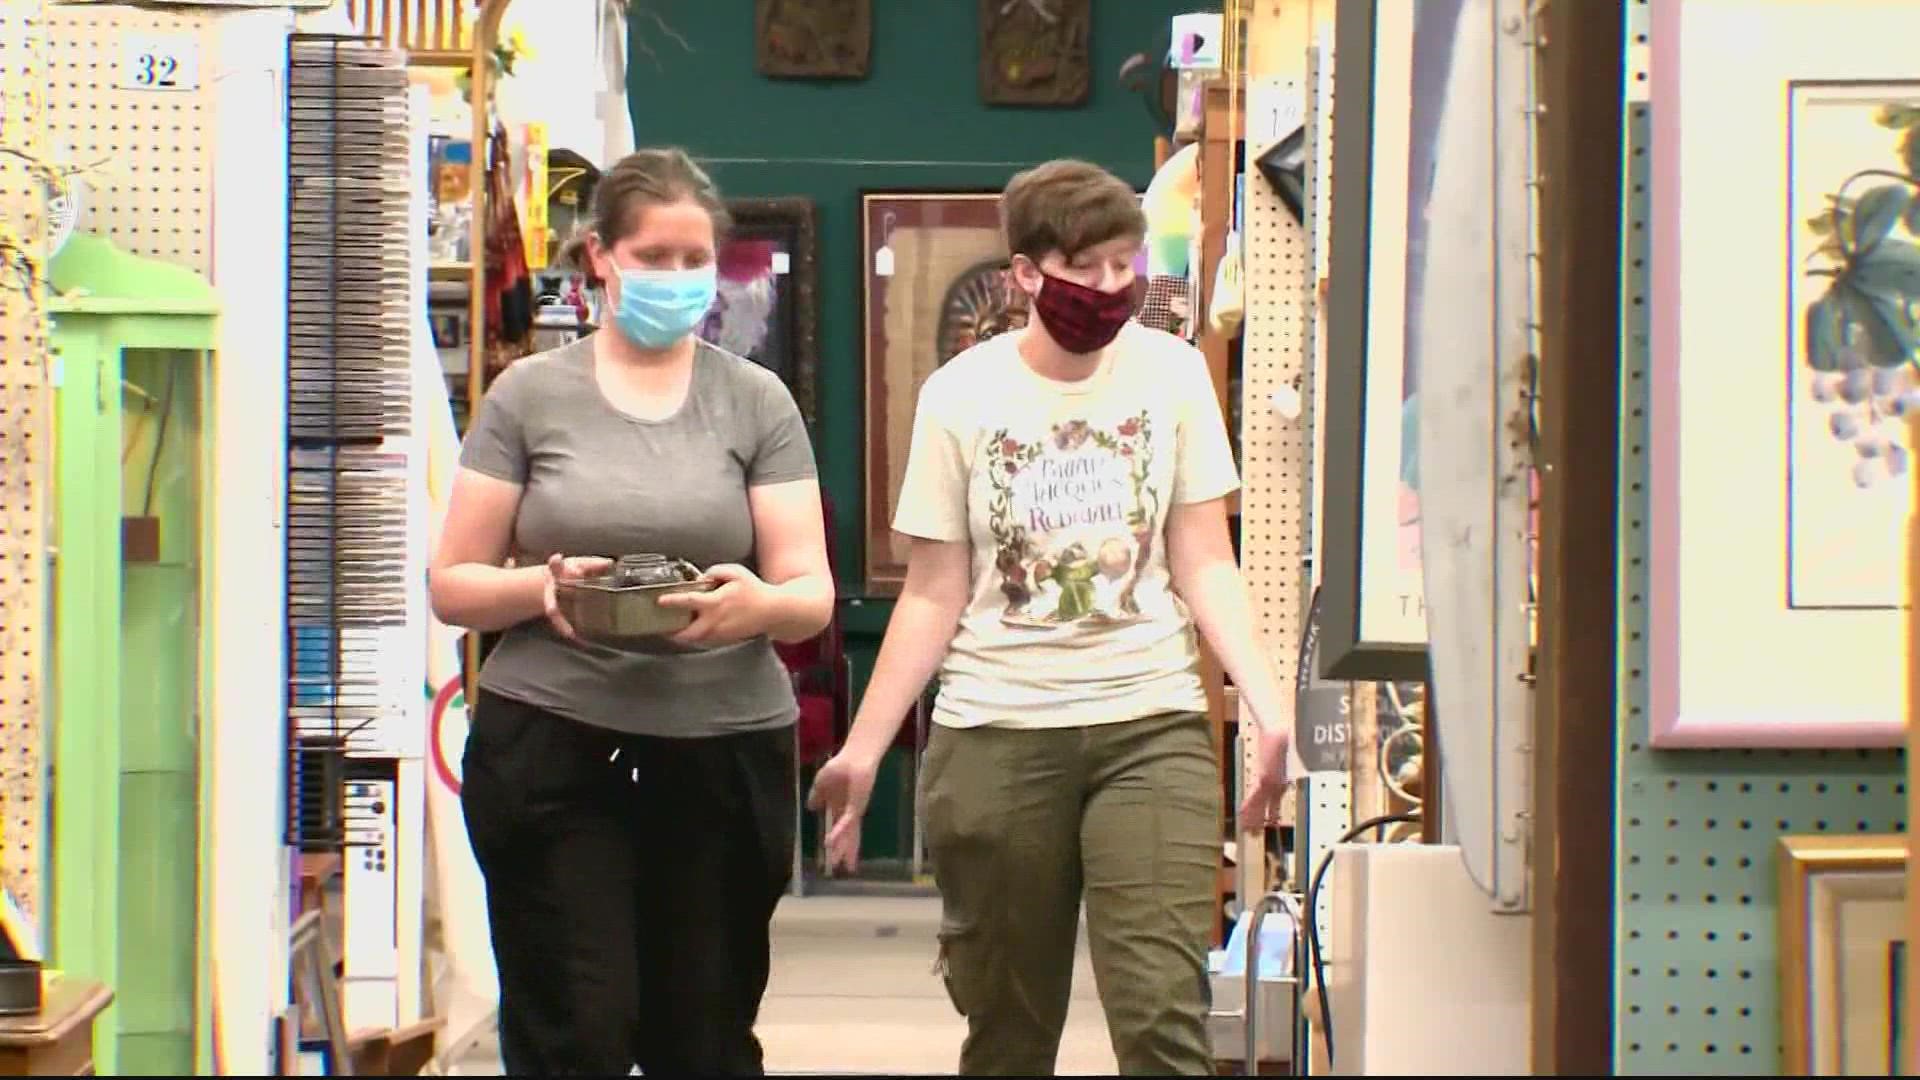 Starting Saturday, July 31, masks are required indoors in DC regardless of vaccination status